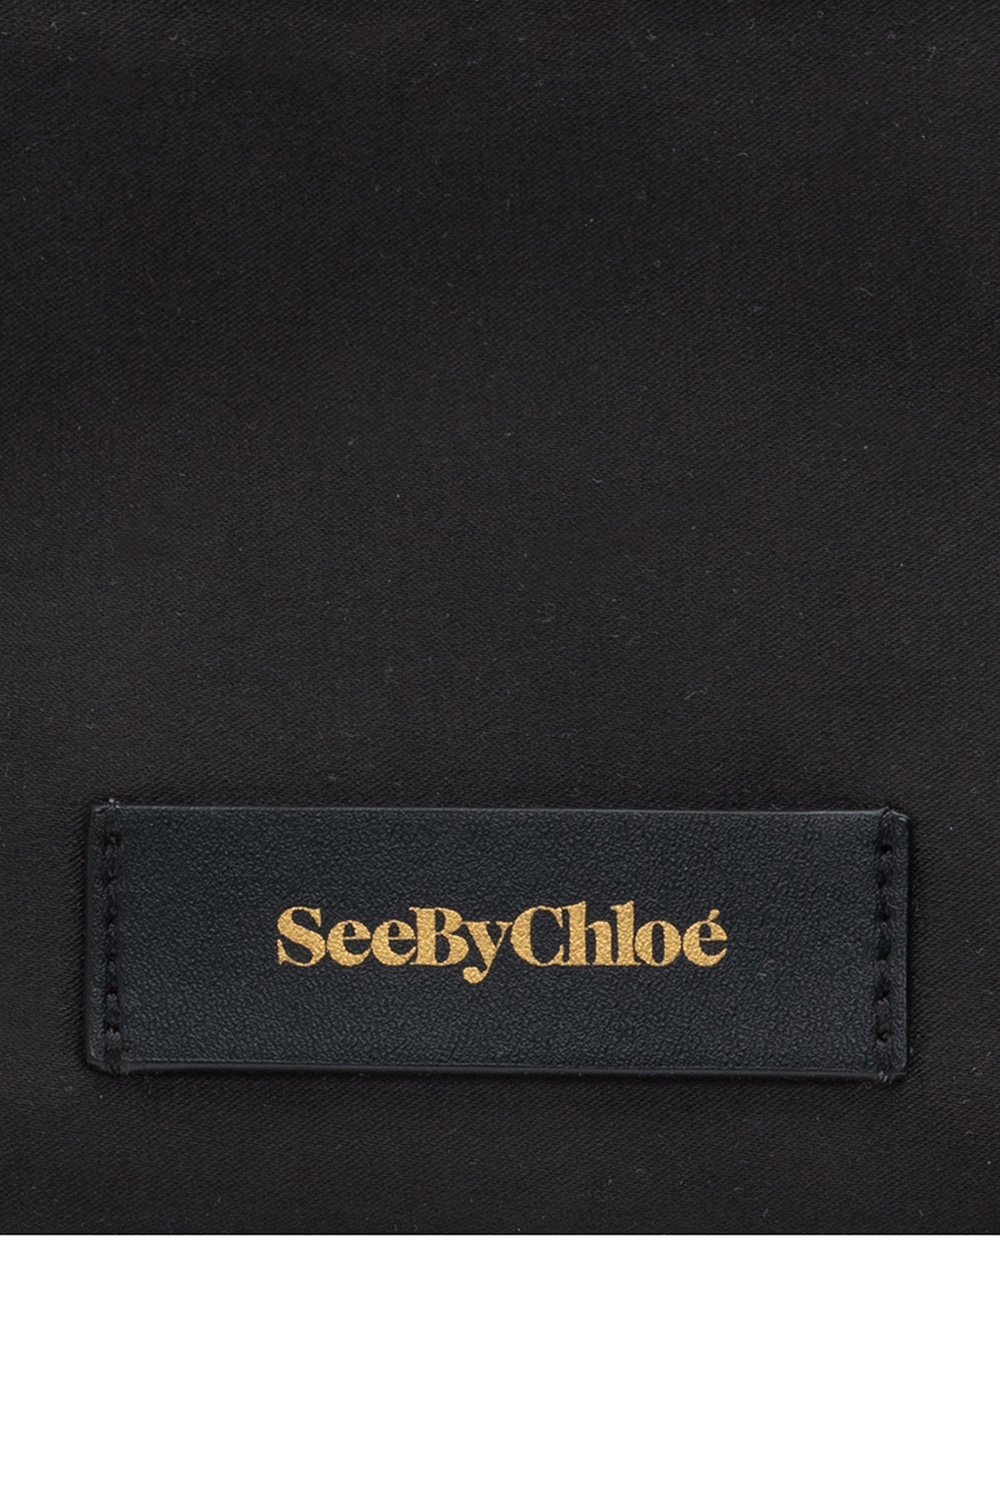 See By Chloé ‘Beth’ pouch